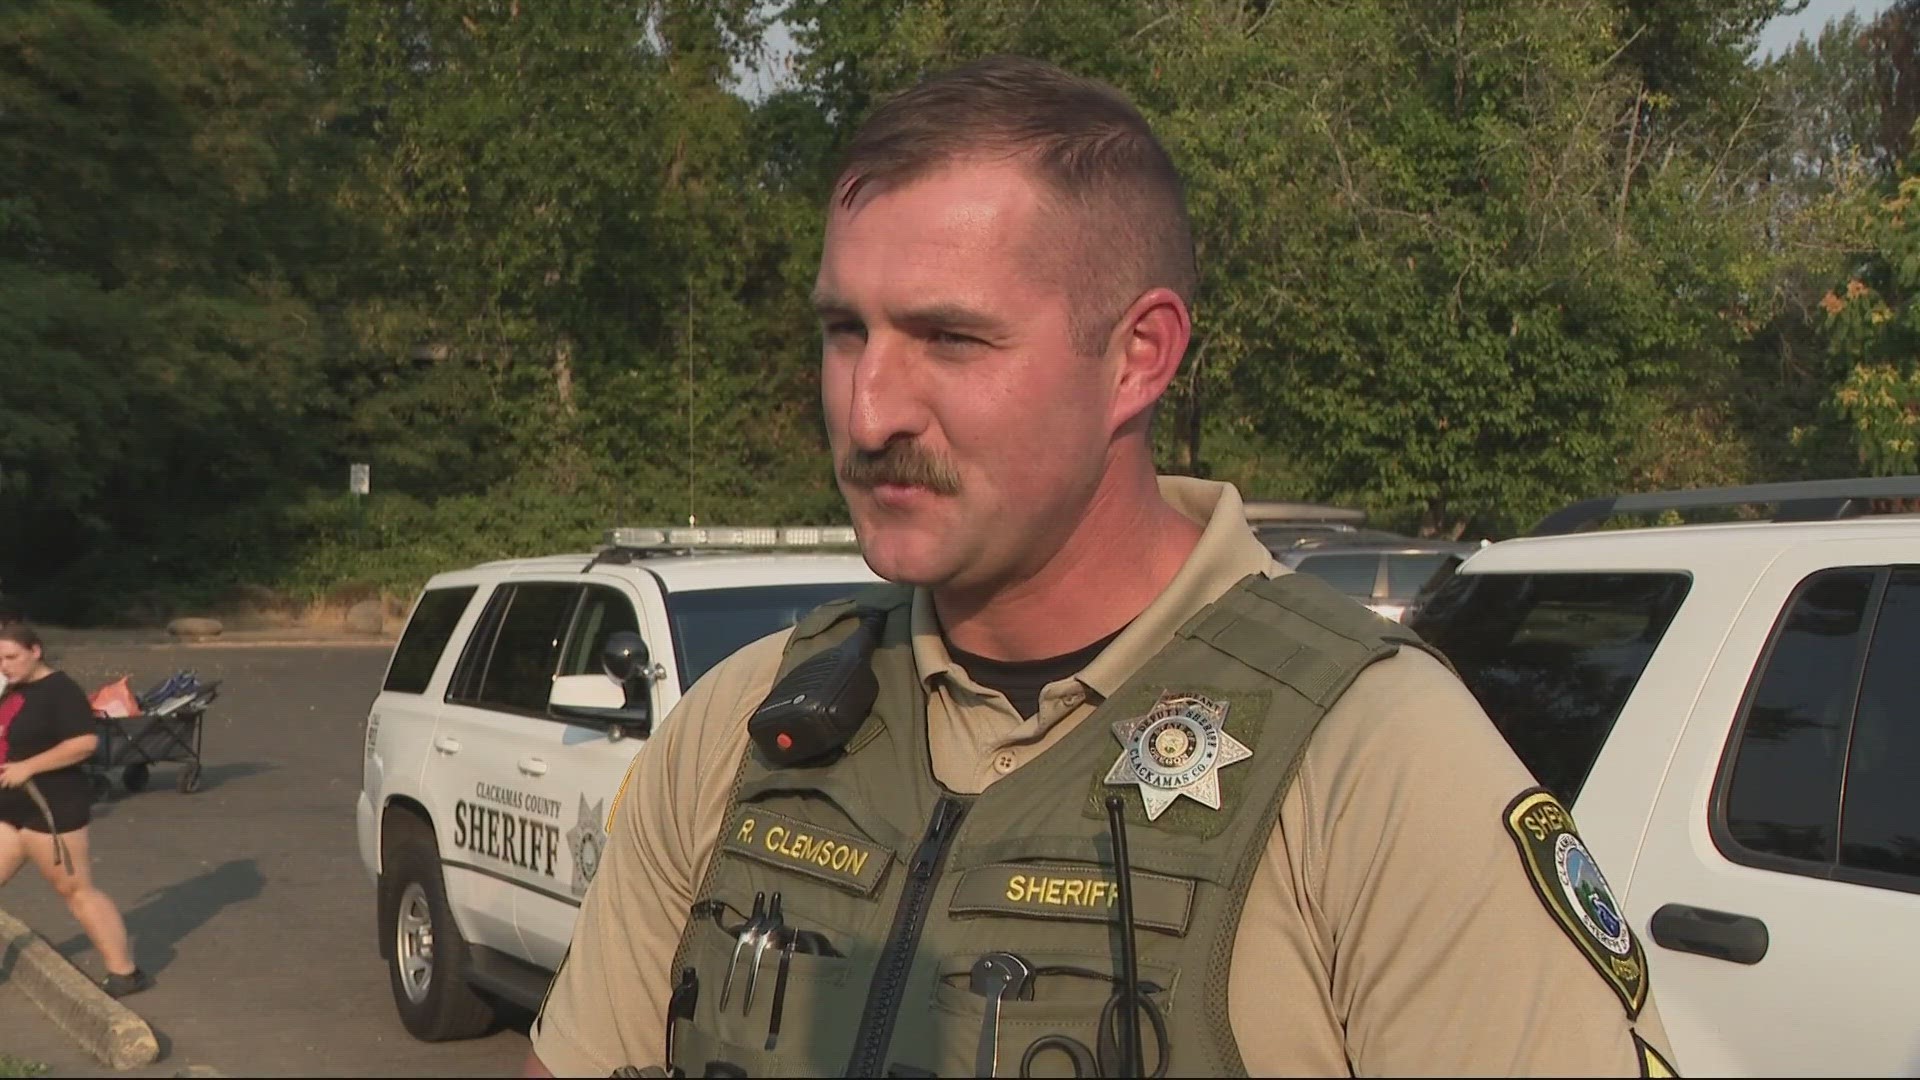 Clackamas County Sheriff's Office says it was a busy weekend for deputies responding to multiple heat and water-related incidents.